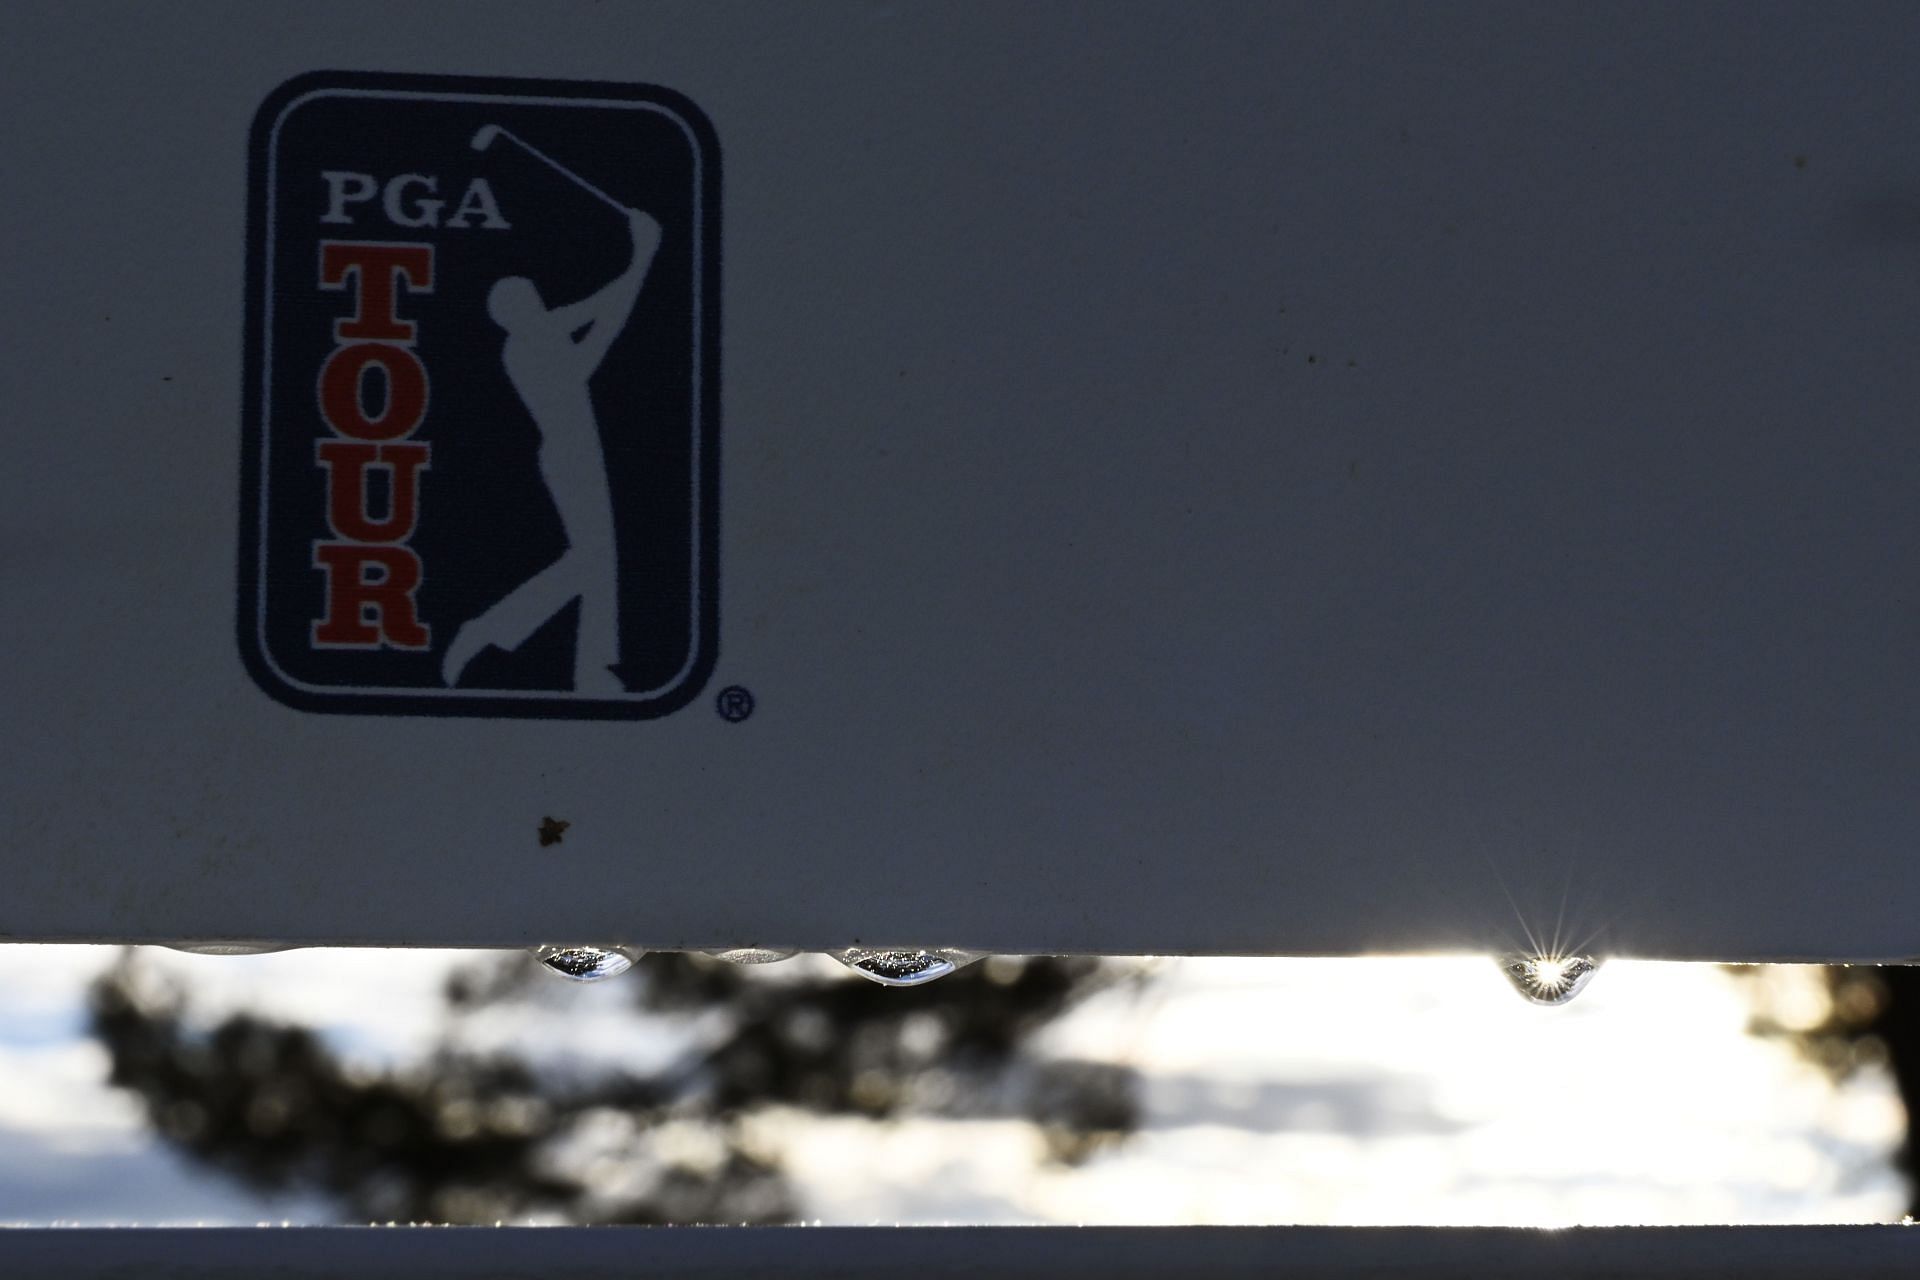 The PGA Tour has a new agreement